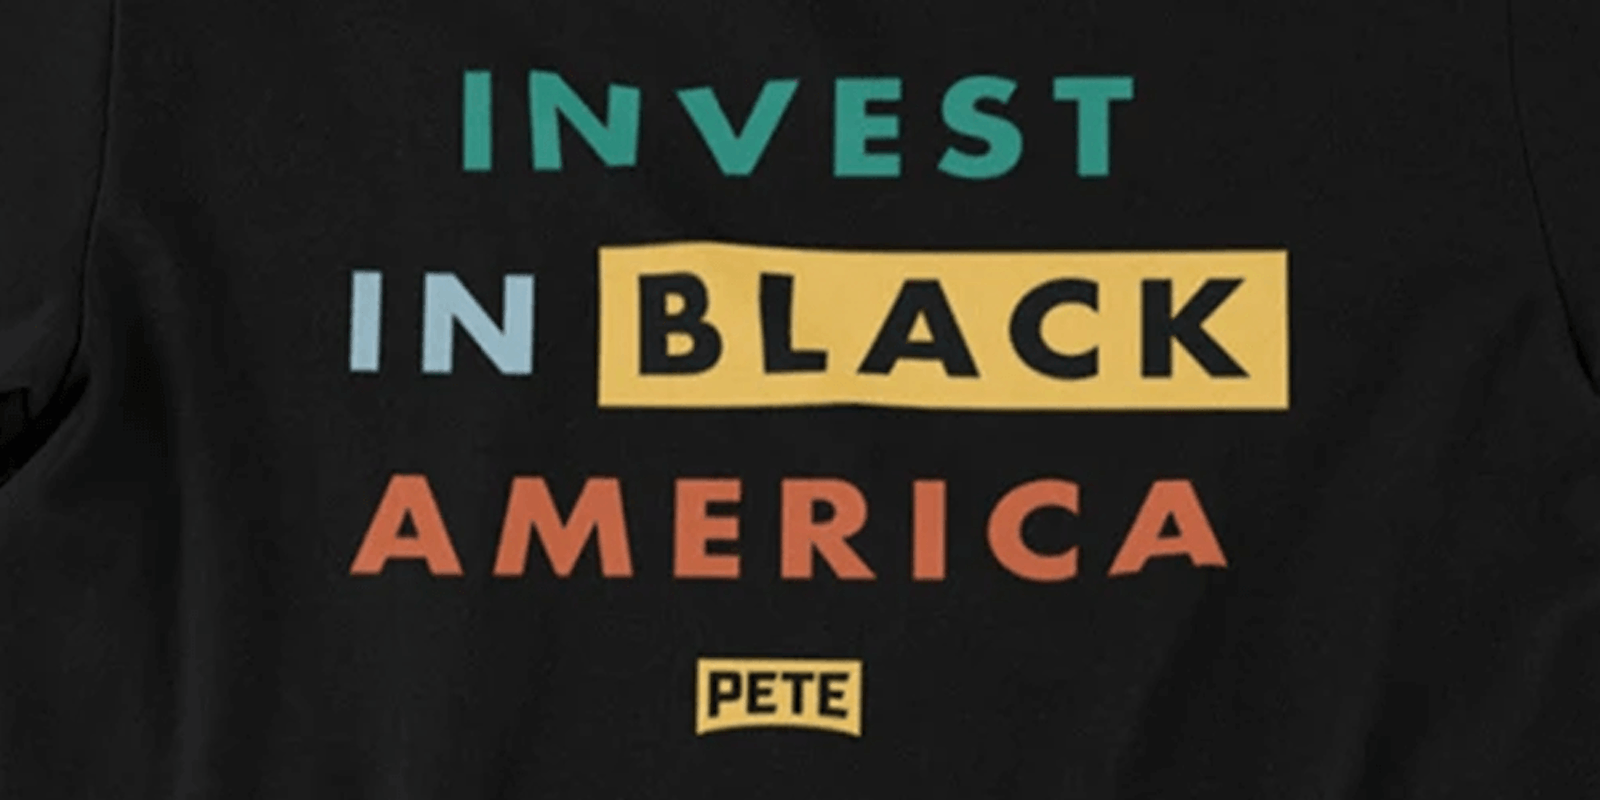 A T-shirt being sold by the Pete Buttigieg campaign is causing a stir online.